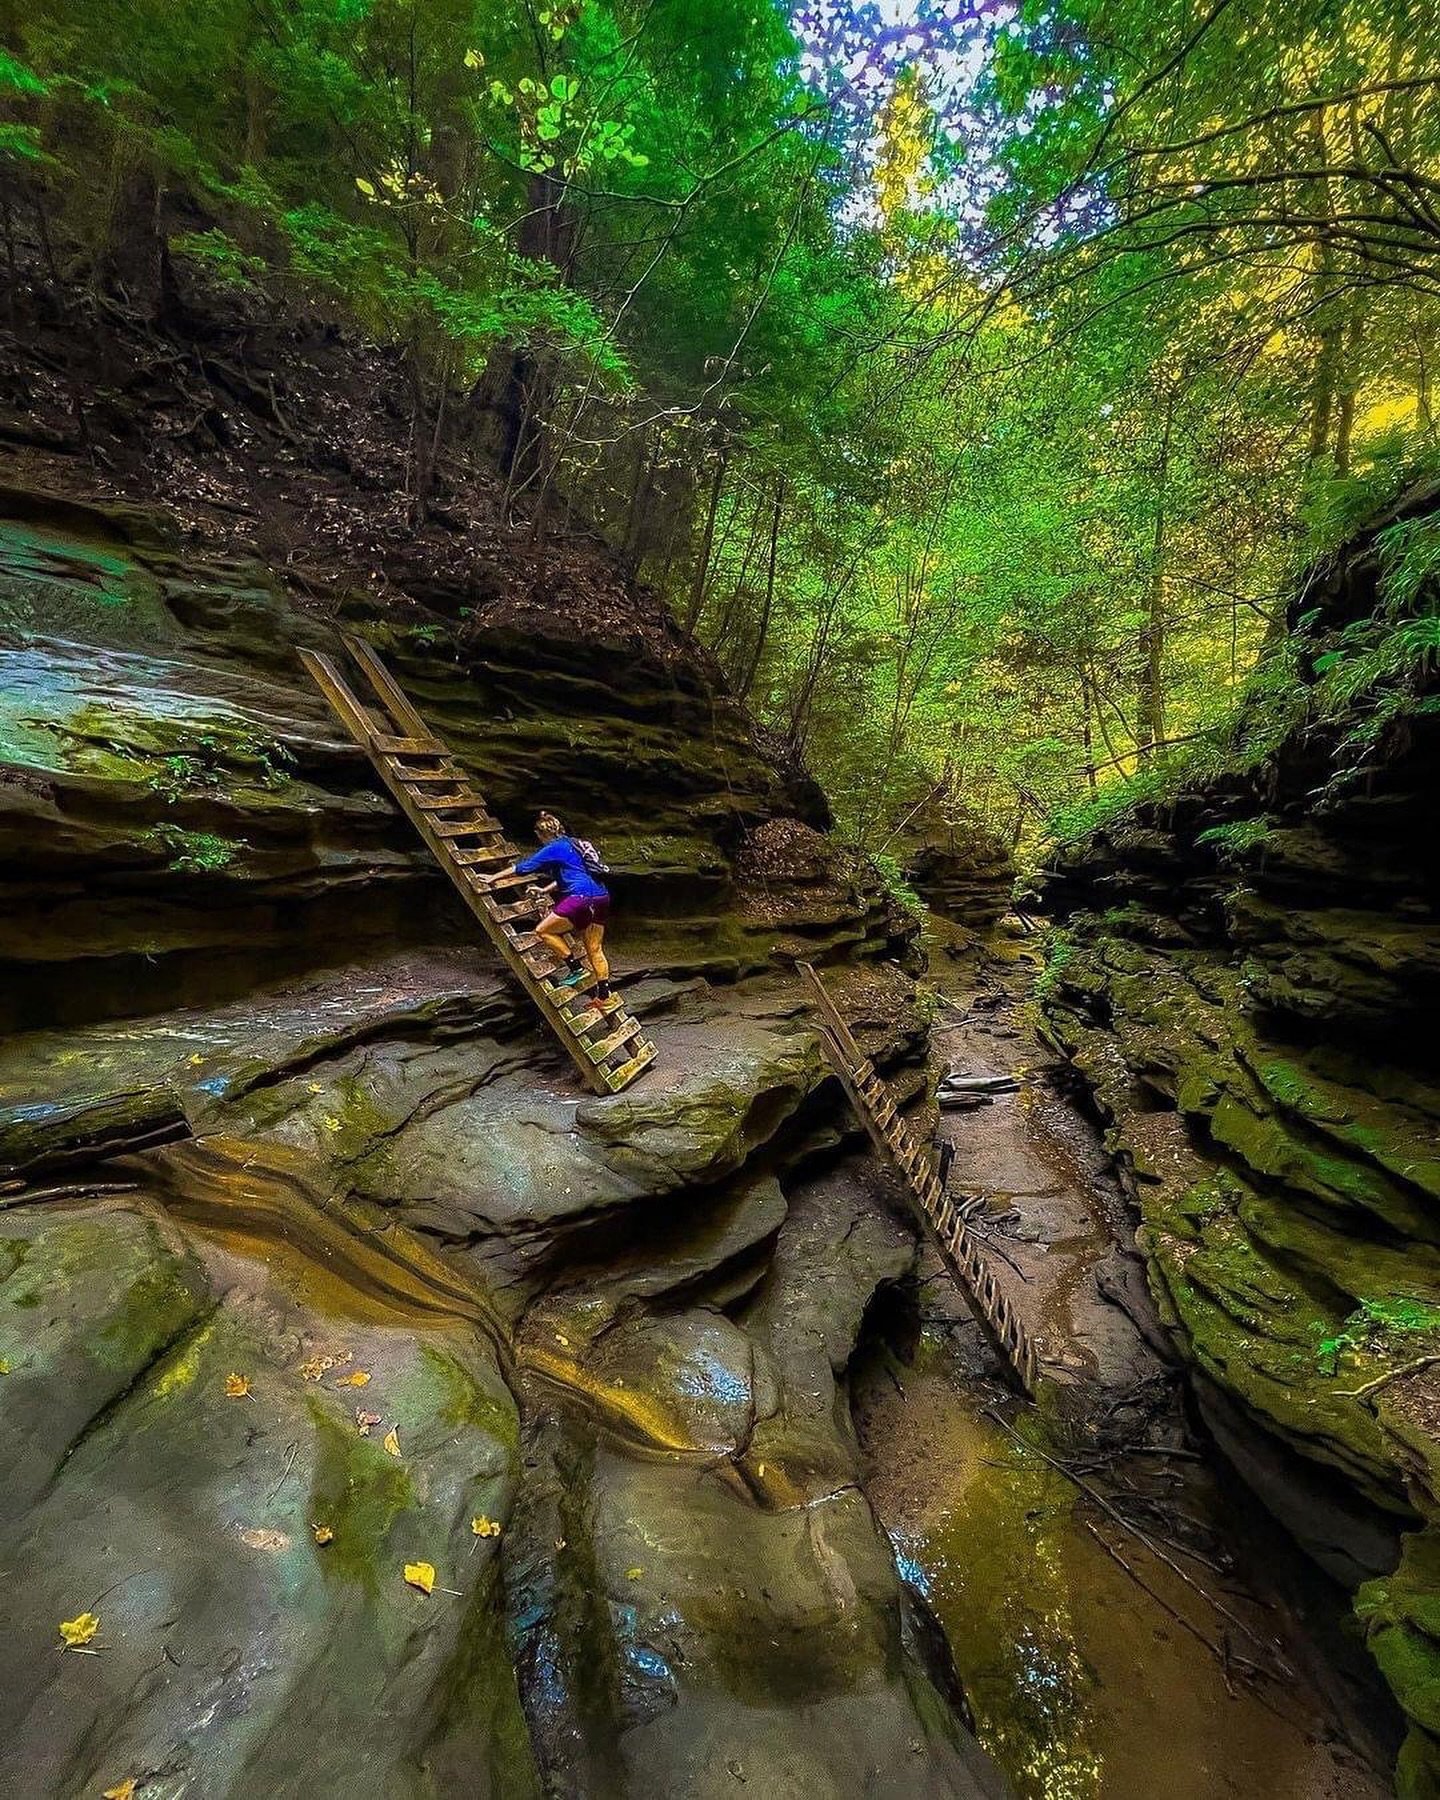 Discover the &ldquo;Midwest&rsquo;s Best Hike&rdquo; right here in Parke County, Indiana! 🌿 

Last year, Turkey Run State Park&rsquo;s Trail 3 was named the Midwest&rsquo;s Best Hike in Midwest Living&rsquo;s annual Best of the Midwest list. The 1.7